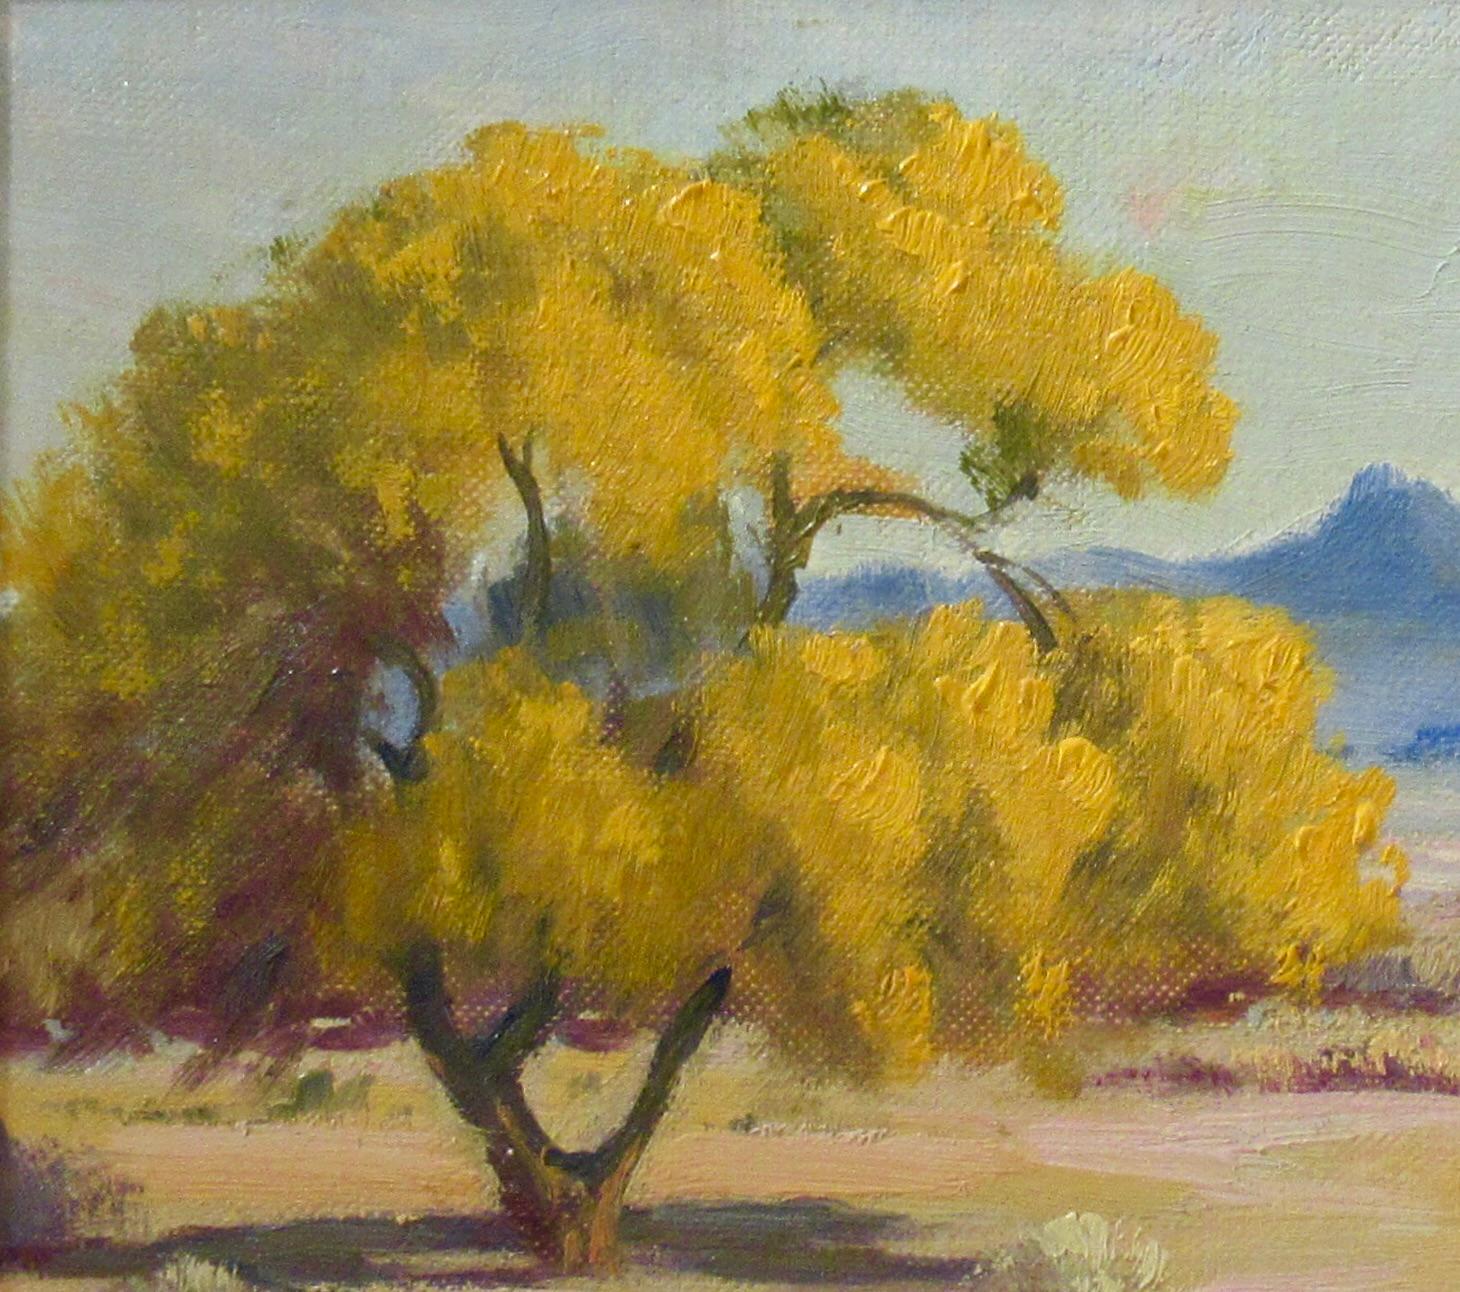 Southwest Landscape - Impressionist Painting by Ralph Goltry